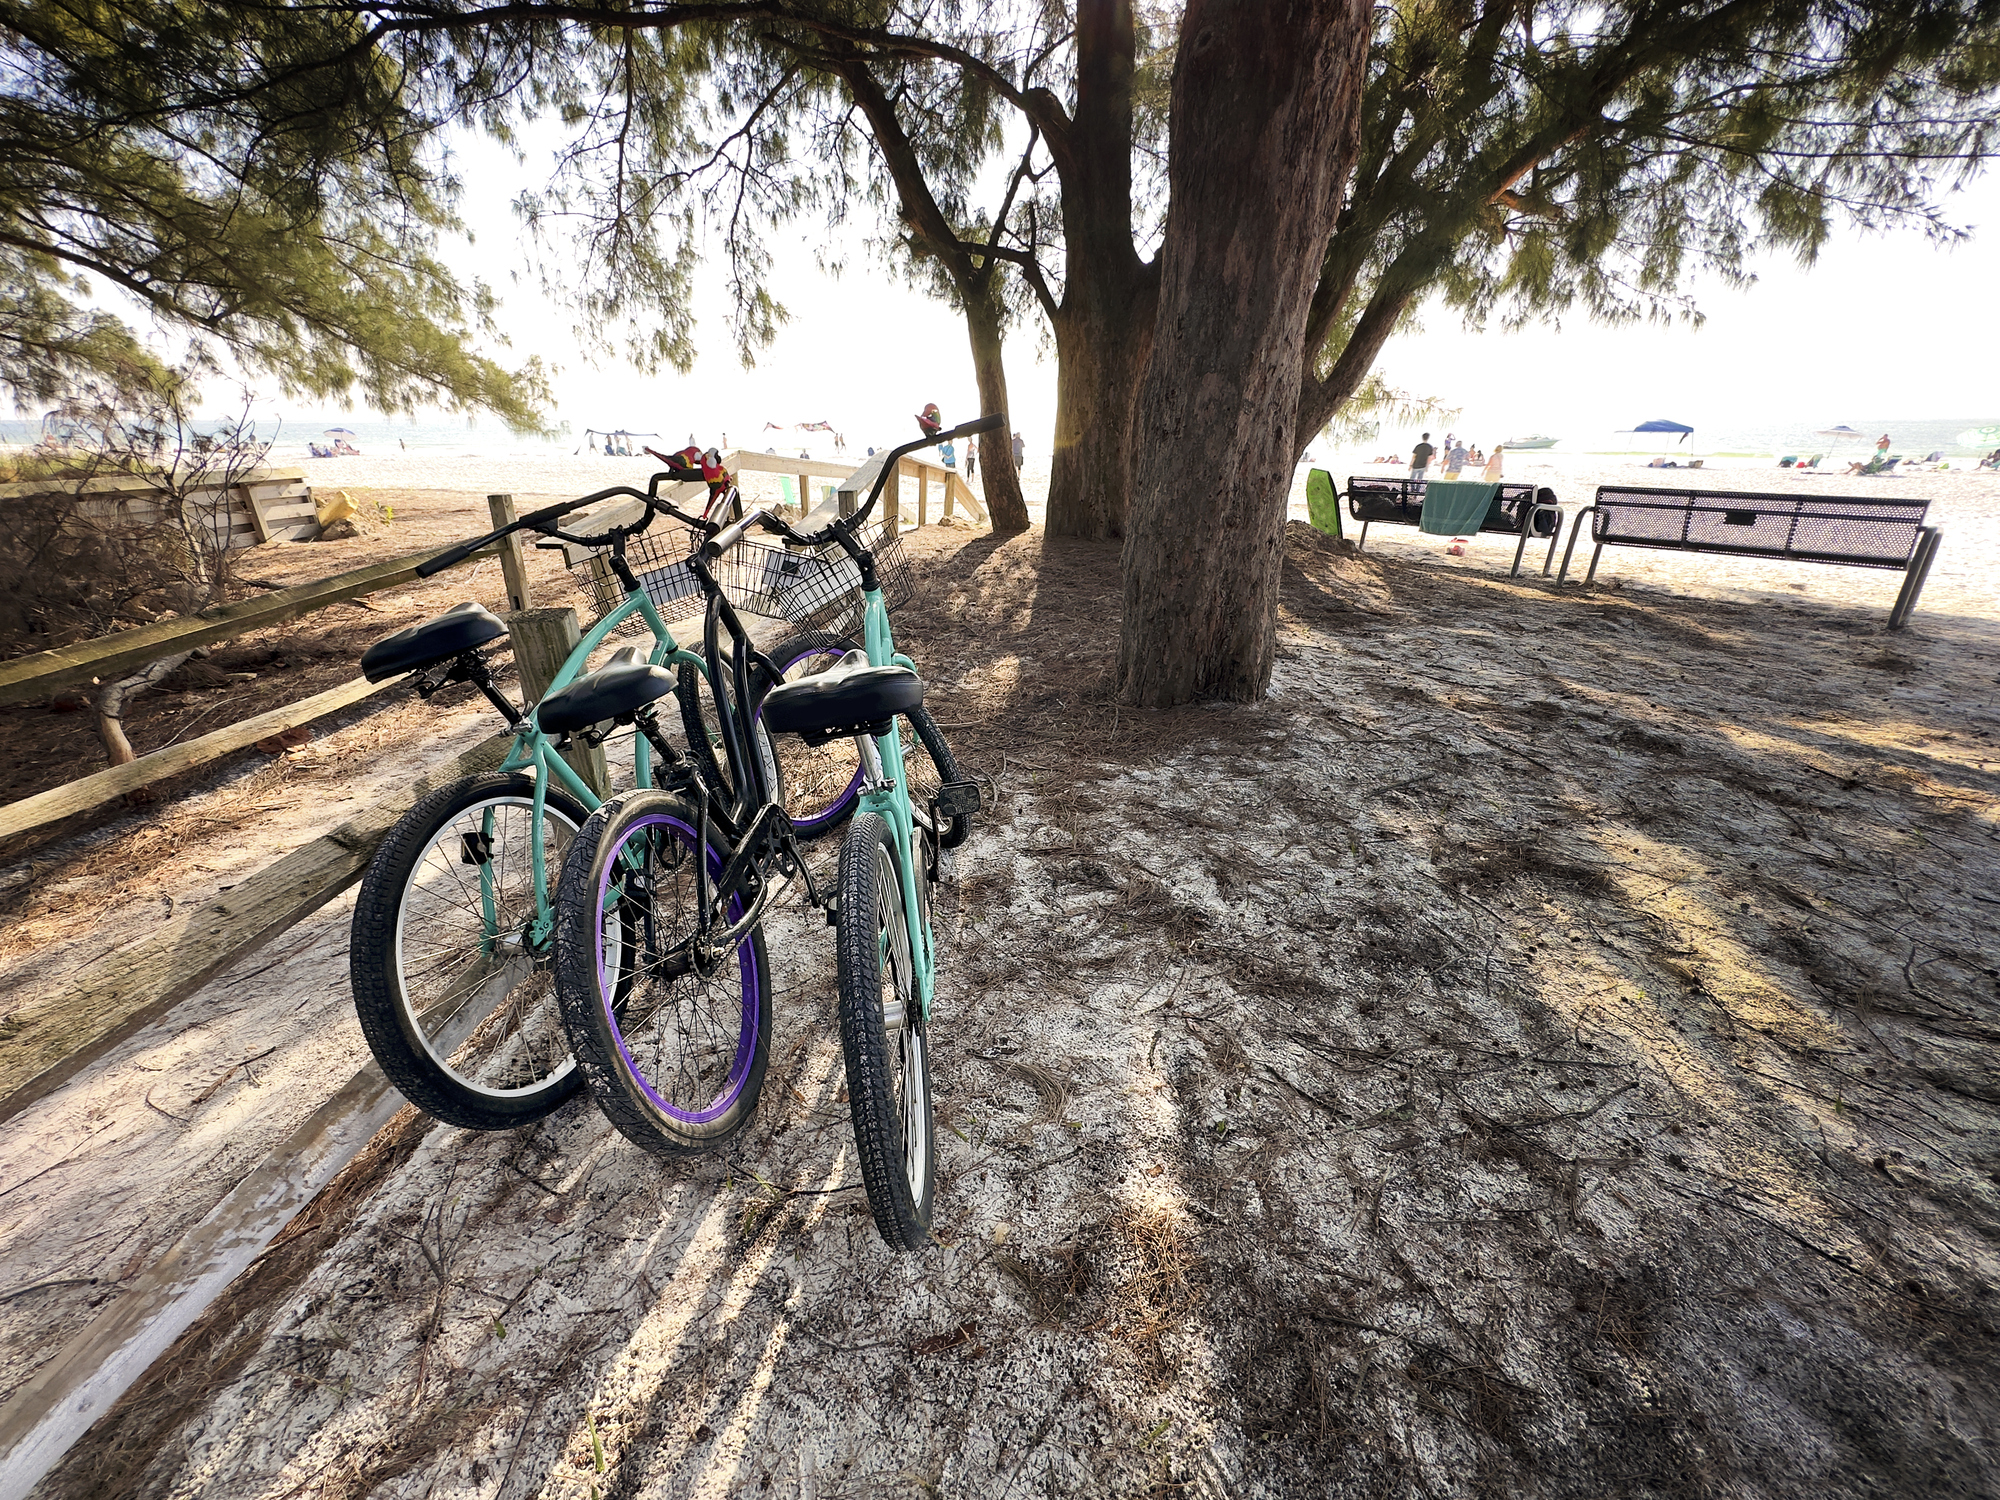 Parked bicycles on tropical beach of Anna Maria Island, Florida